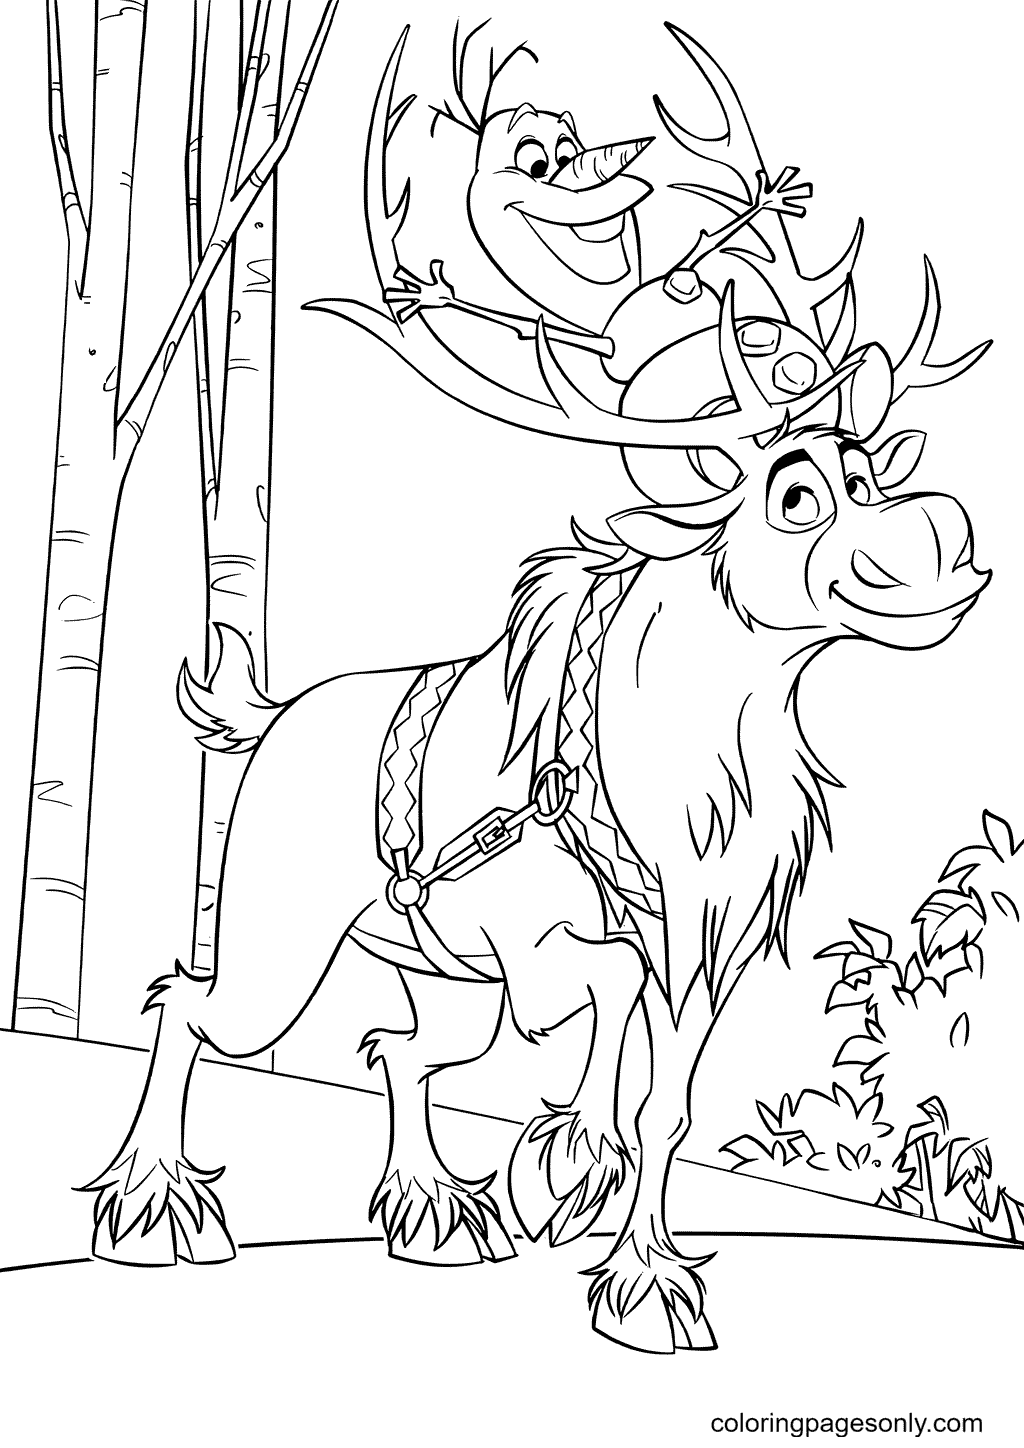 Snowman Olaf and Sven Reindeer Coloring Page